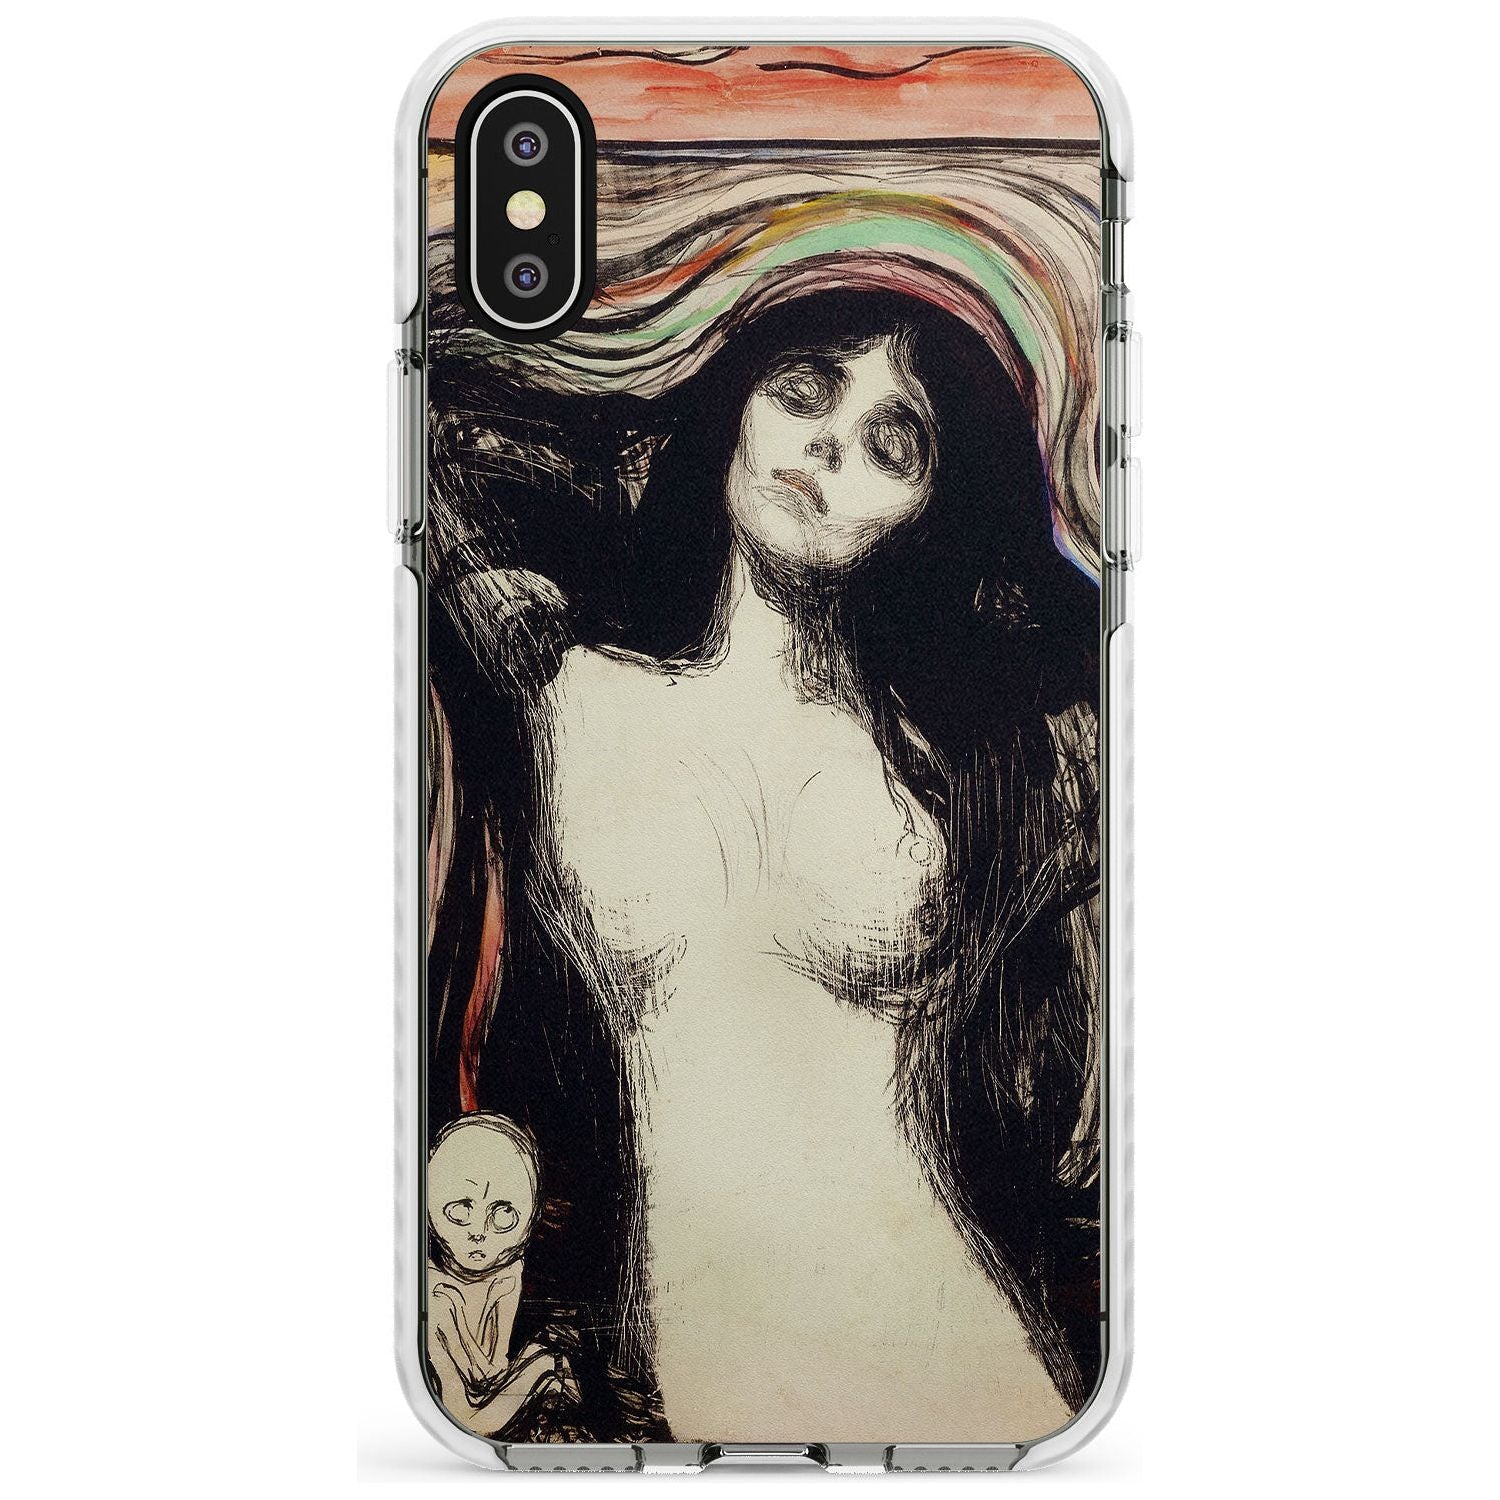 Madonna Impact Phone Case for iPhone X XS Max XR